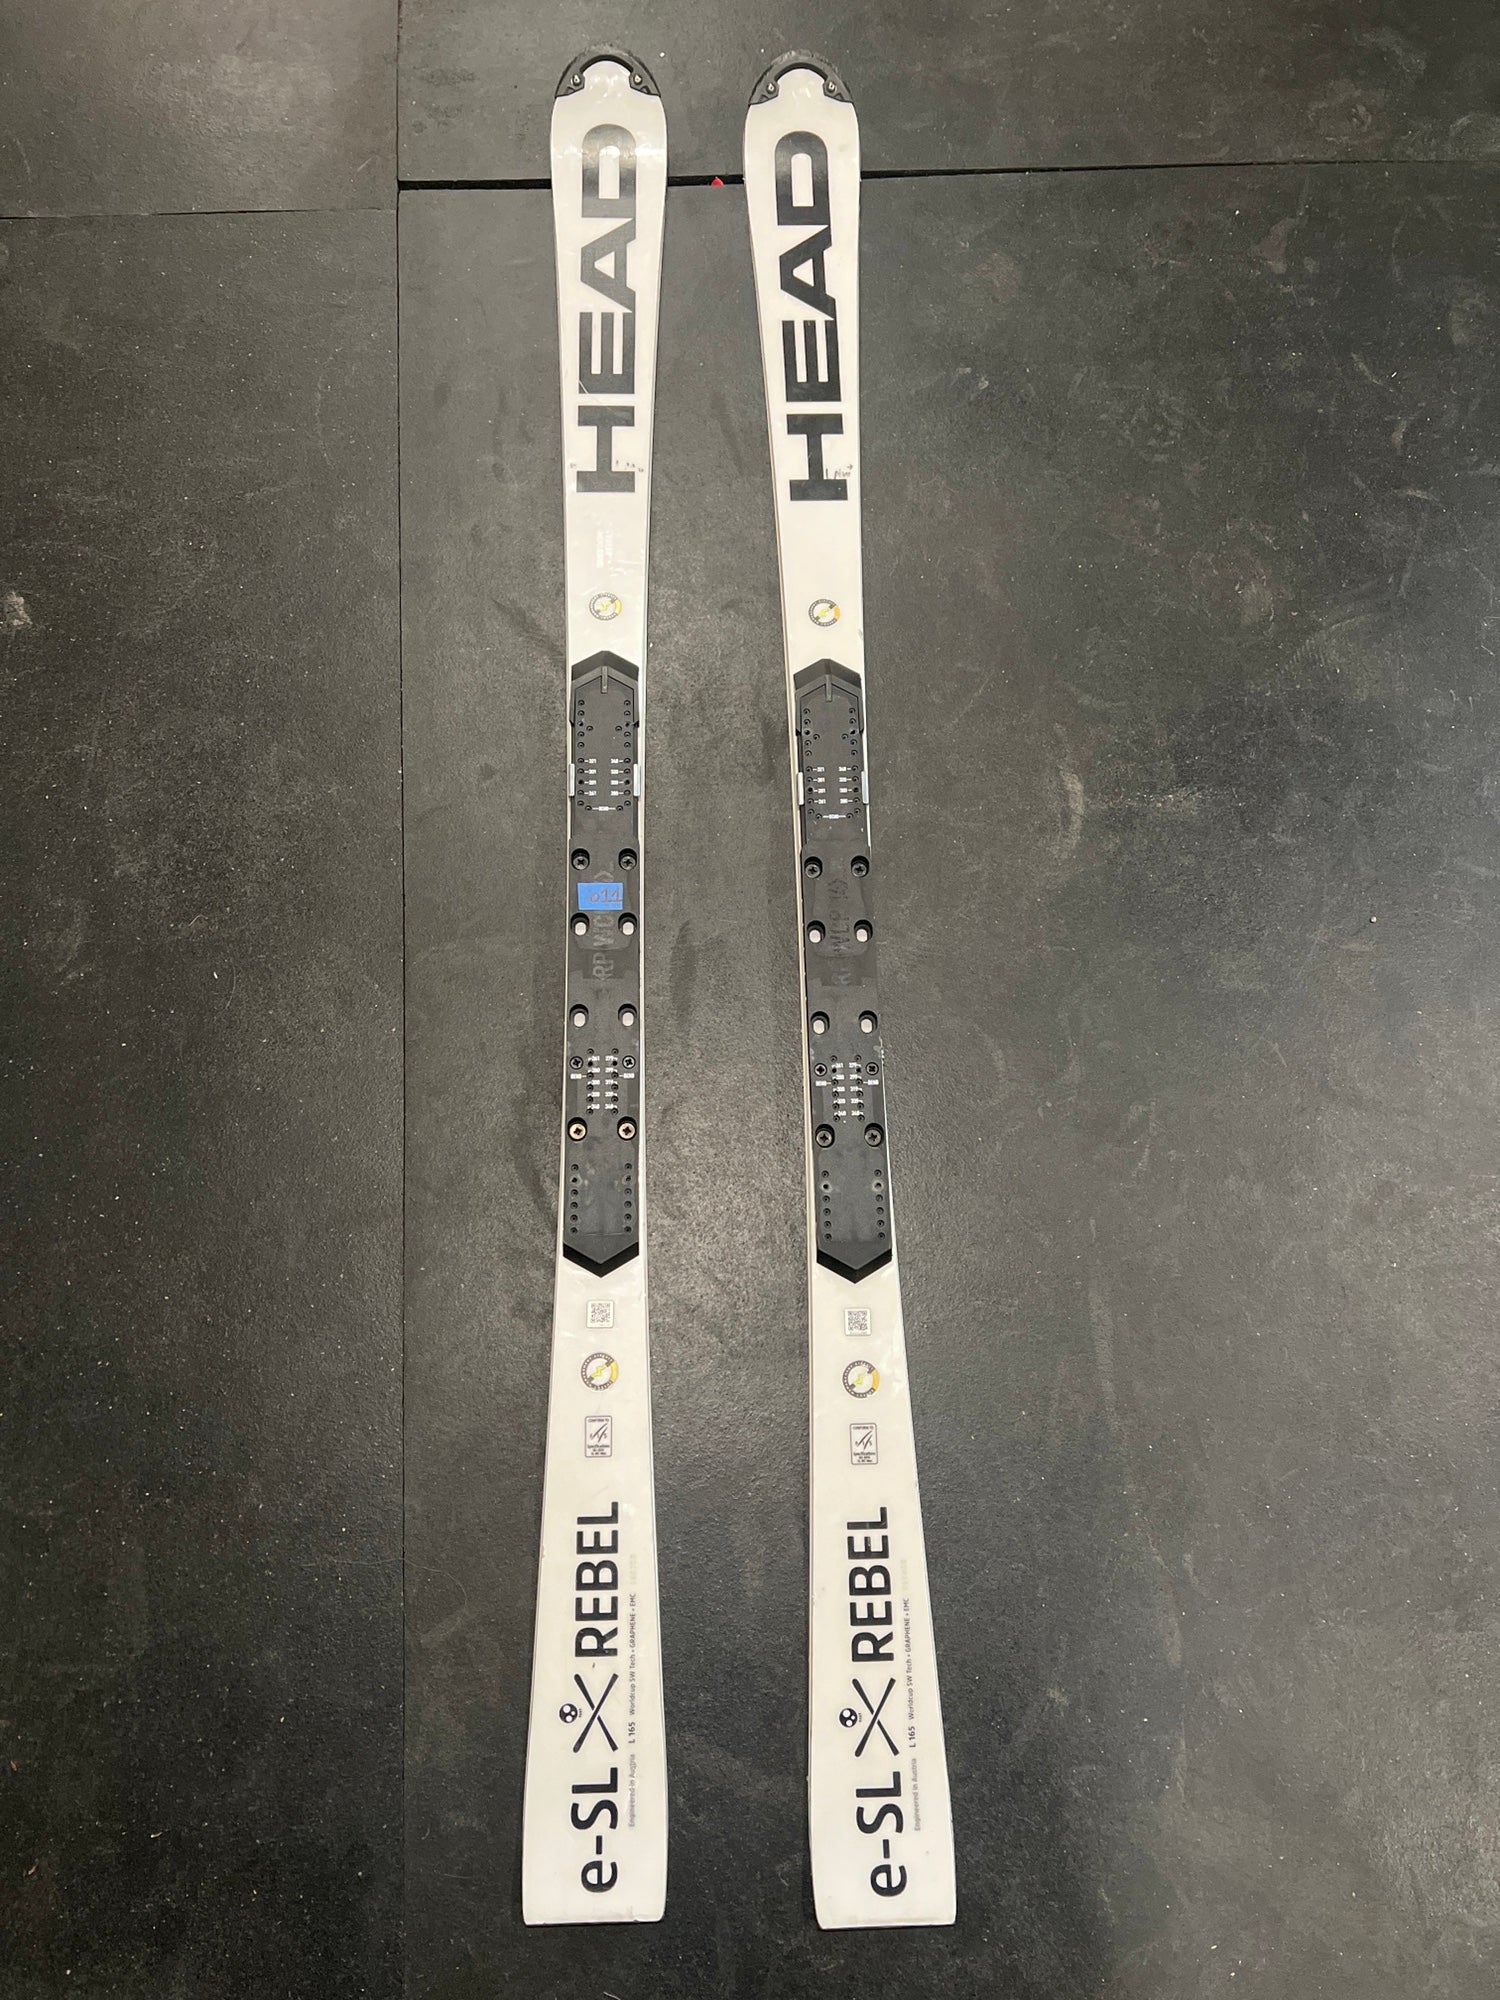 2022 HEAD World Cup Rebels i.SL RD Skis. (Europa Cup Level 